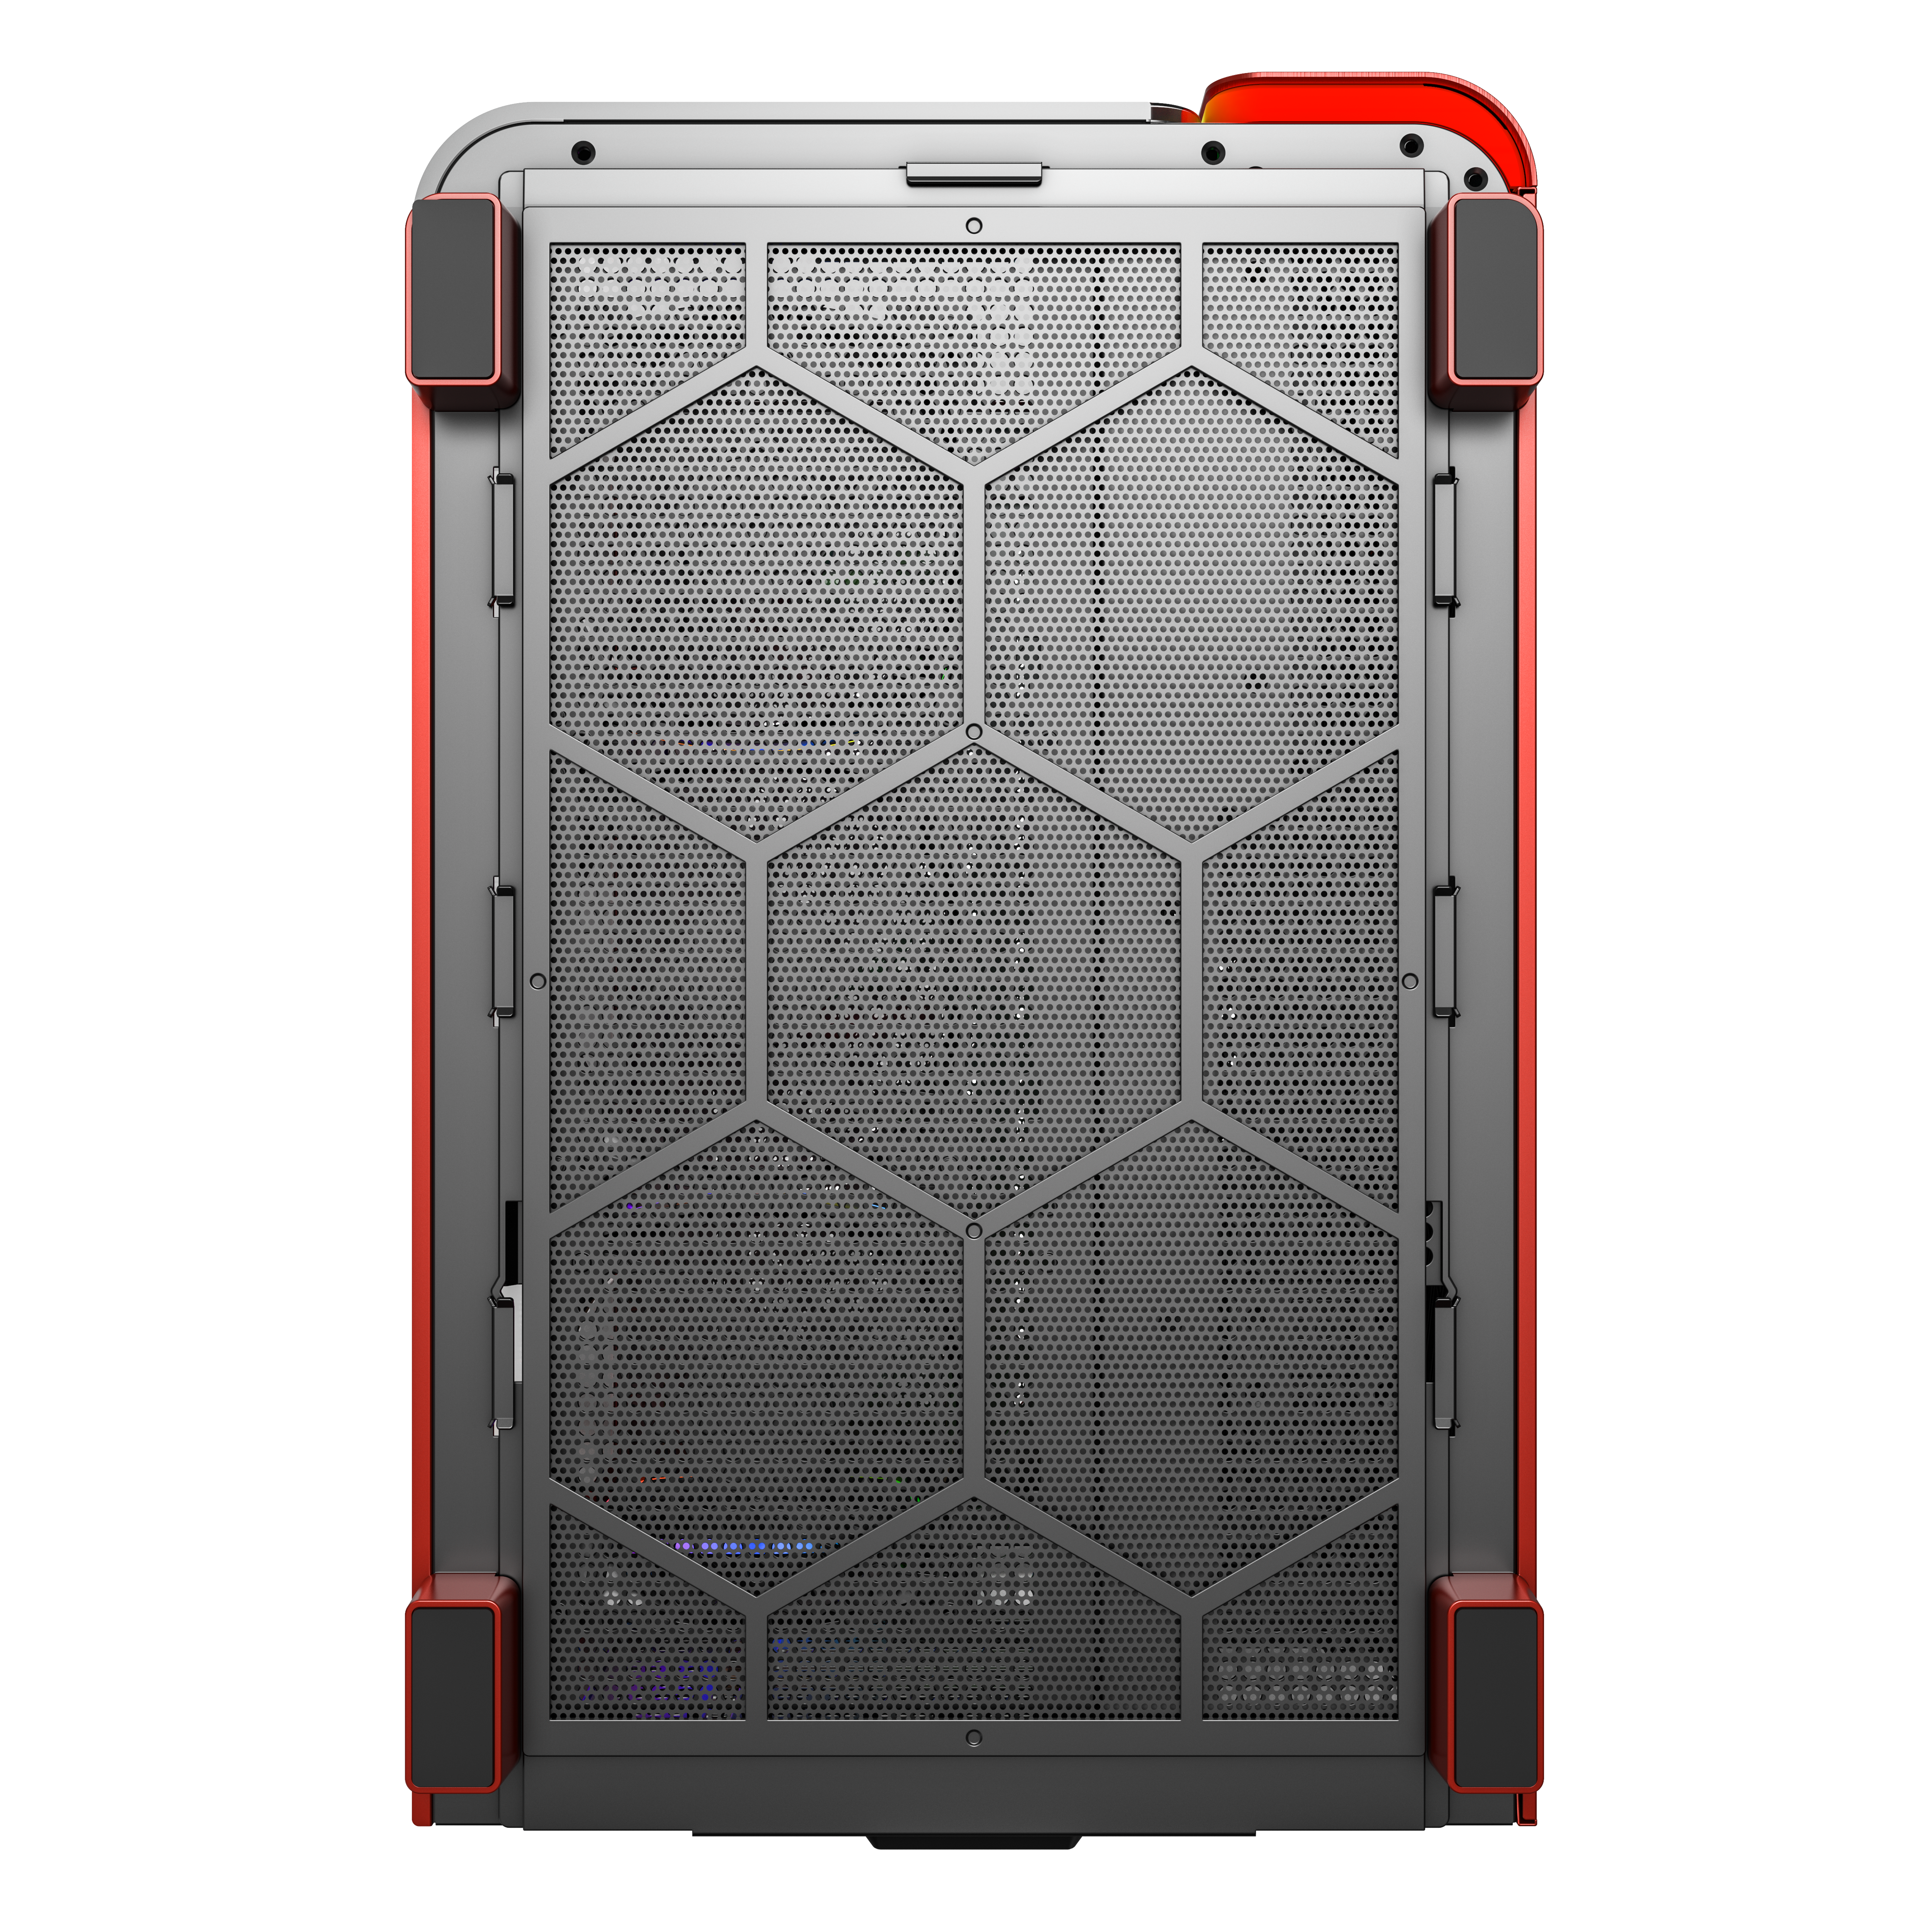 montech - Montech KING 95 PRO Midi-Tower, Tempered Glass, ARGB - Red